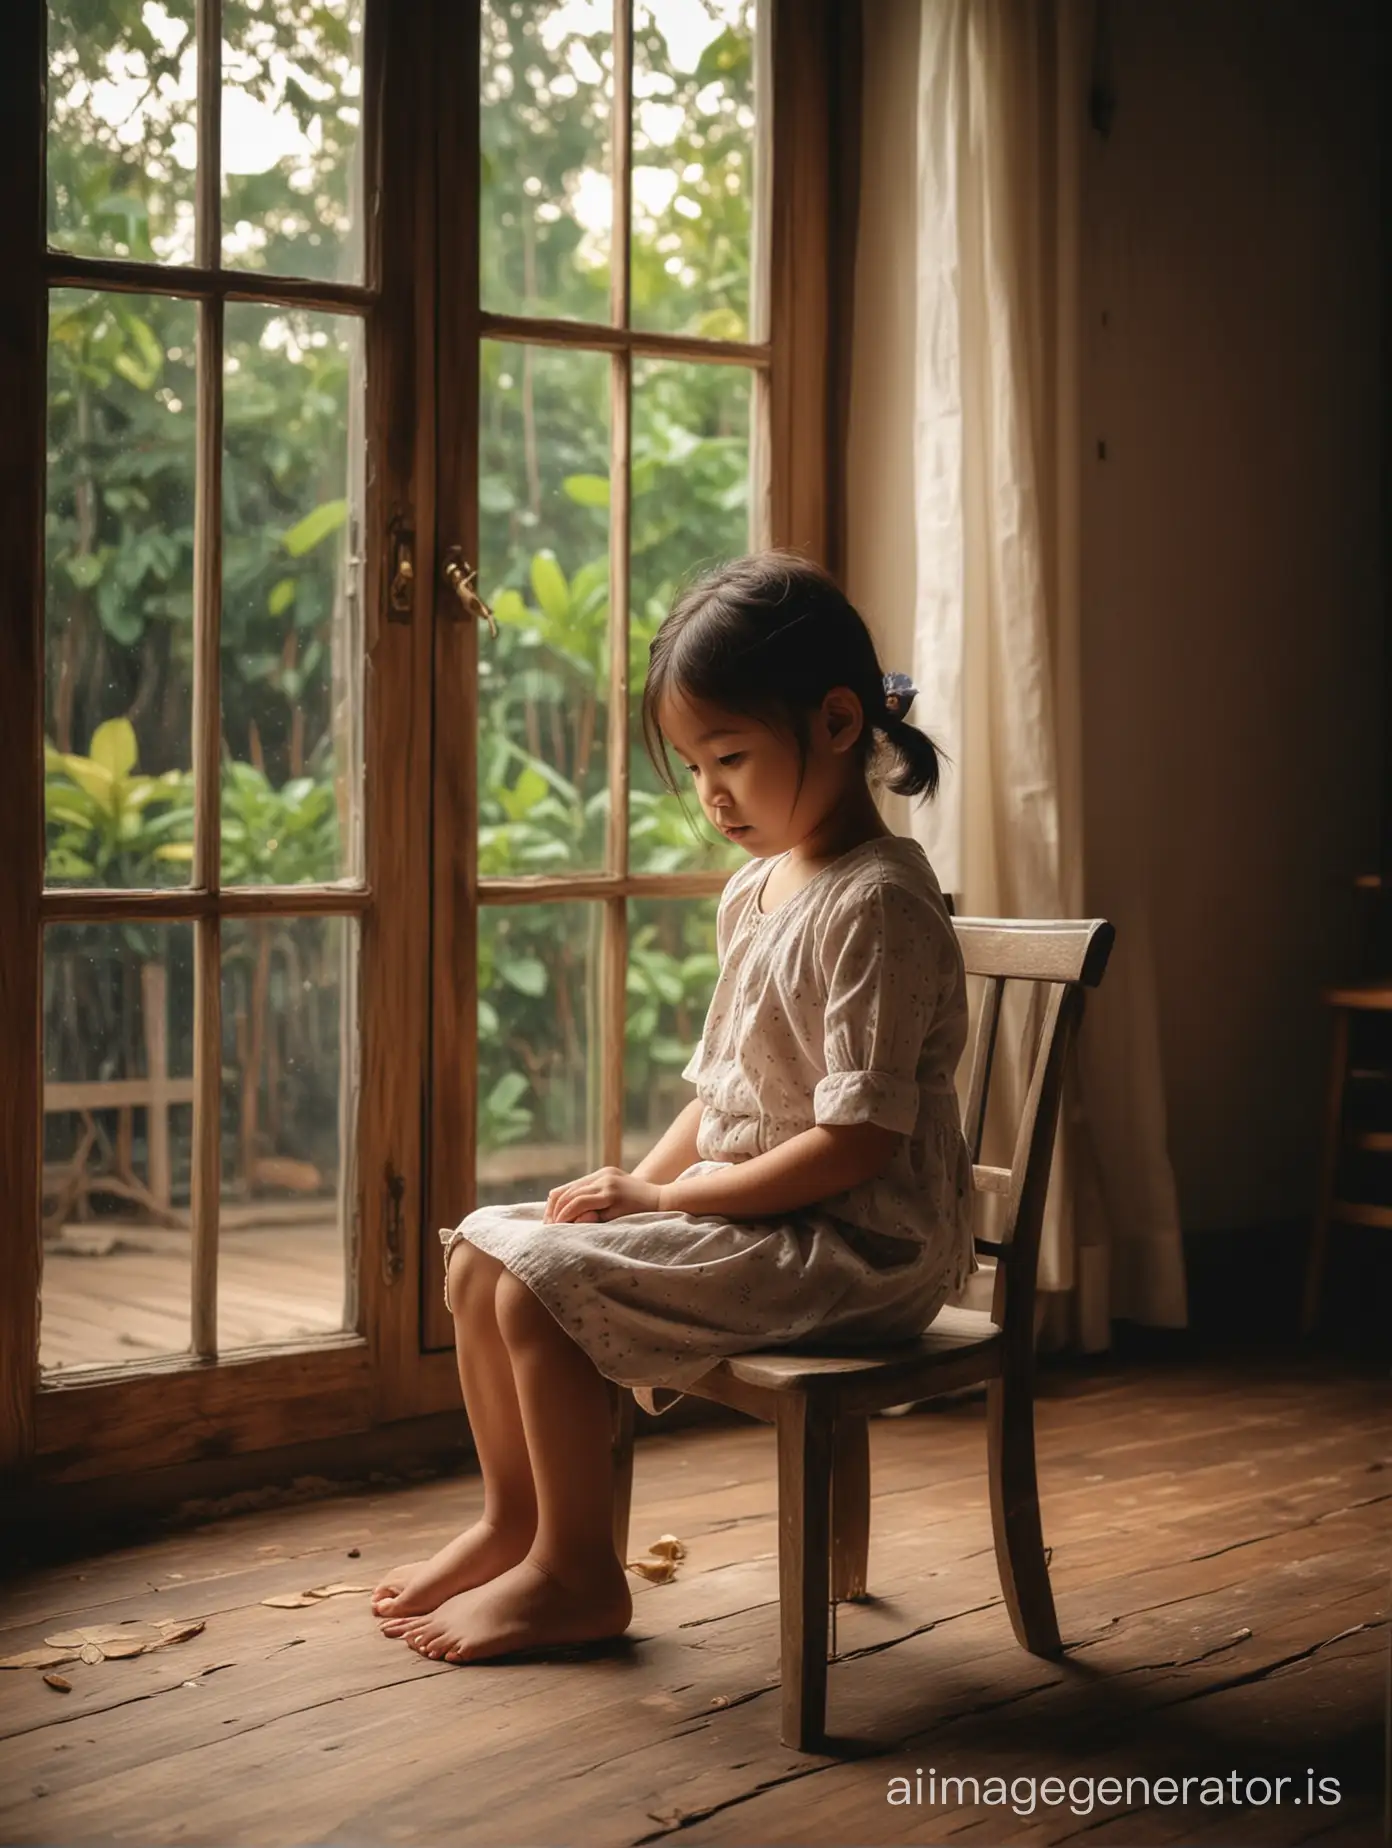 Contemplative-Indonesian-Girl-Sitting-on-Wooden-Chair-by-Window-in-Old-House-at-Night